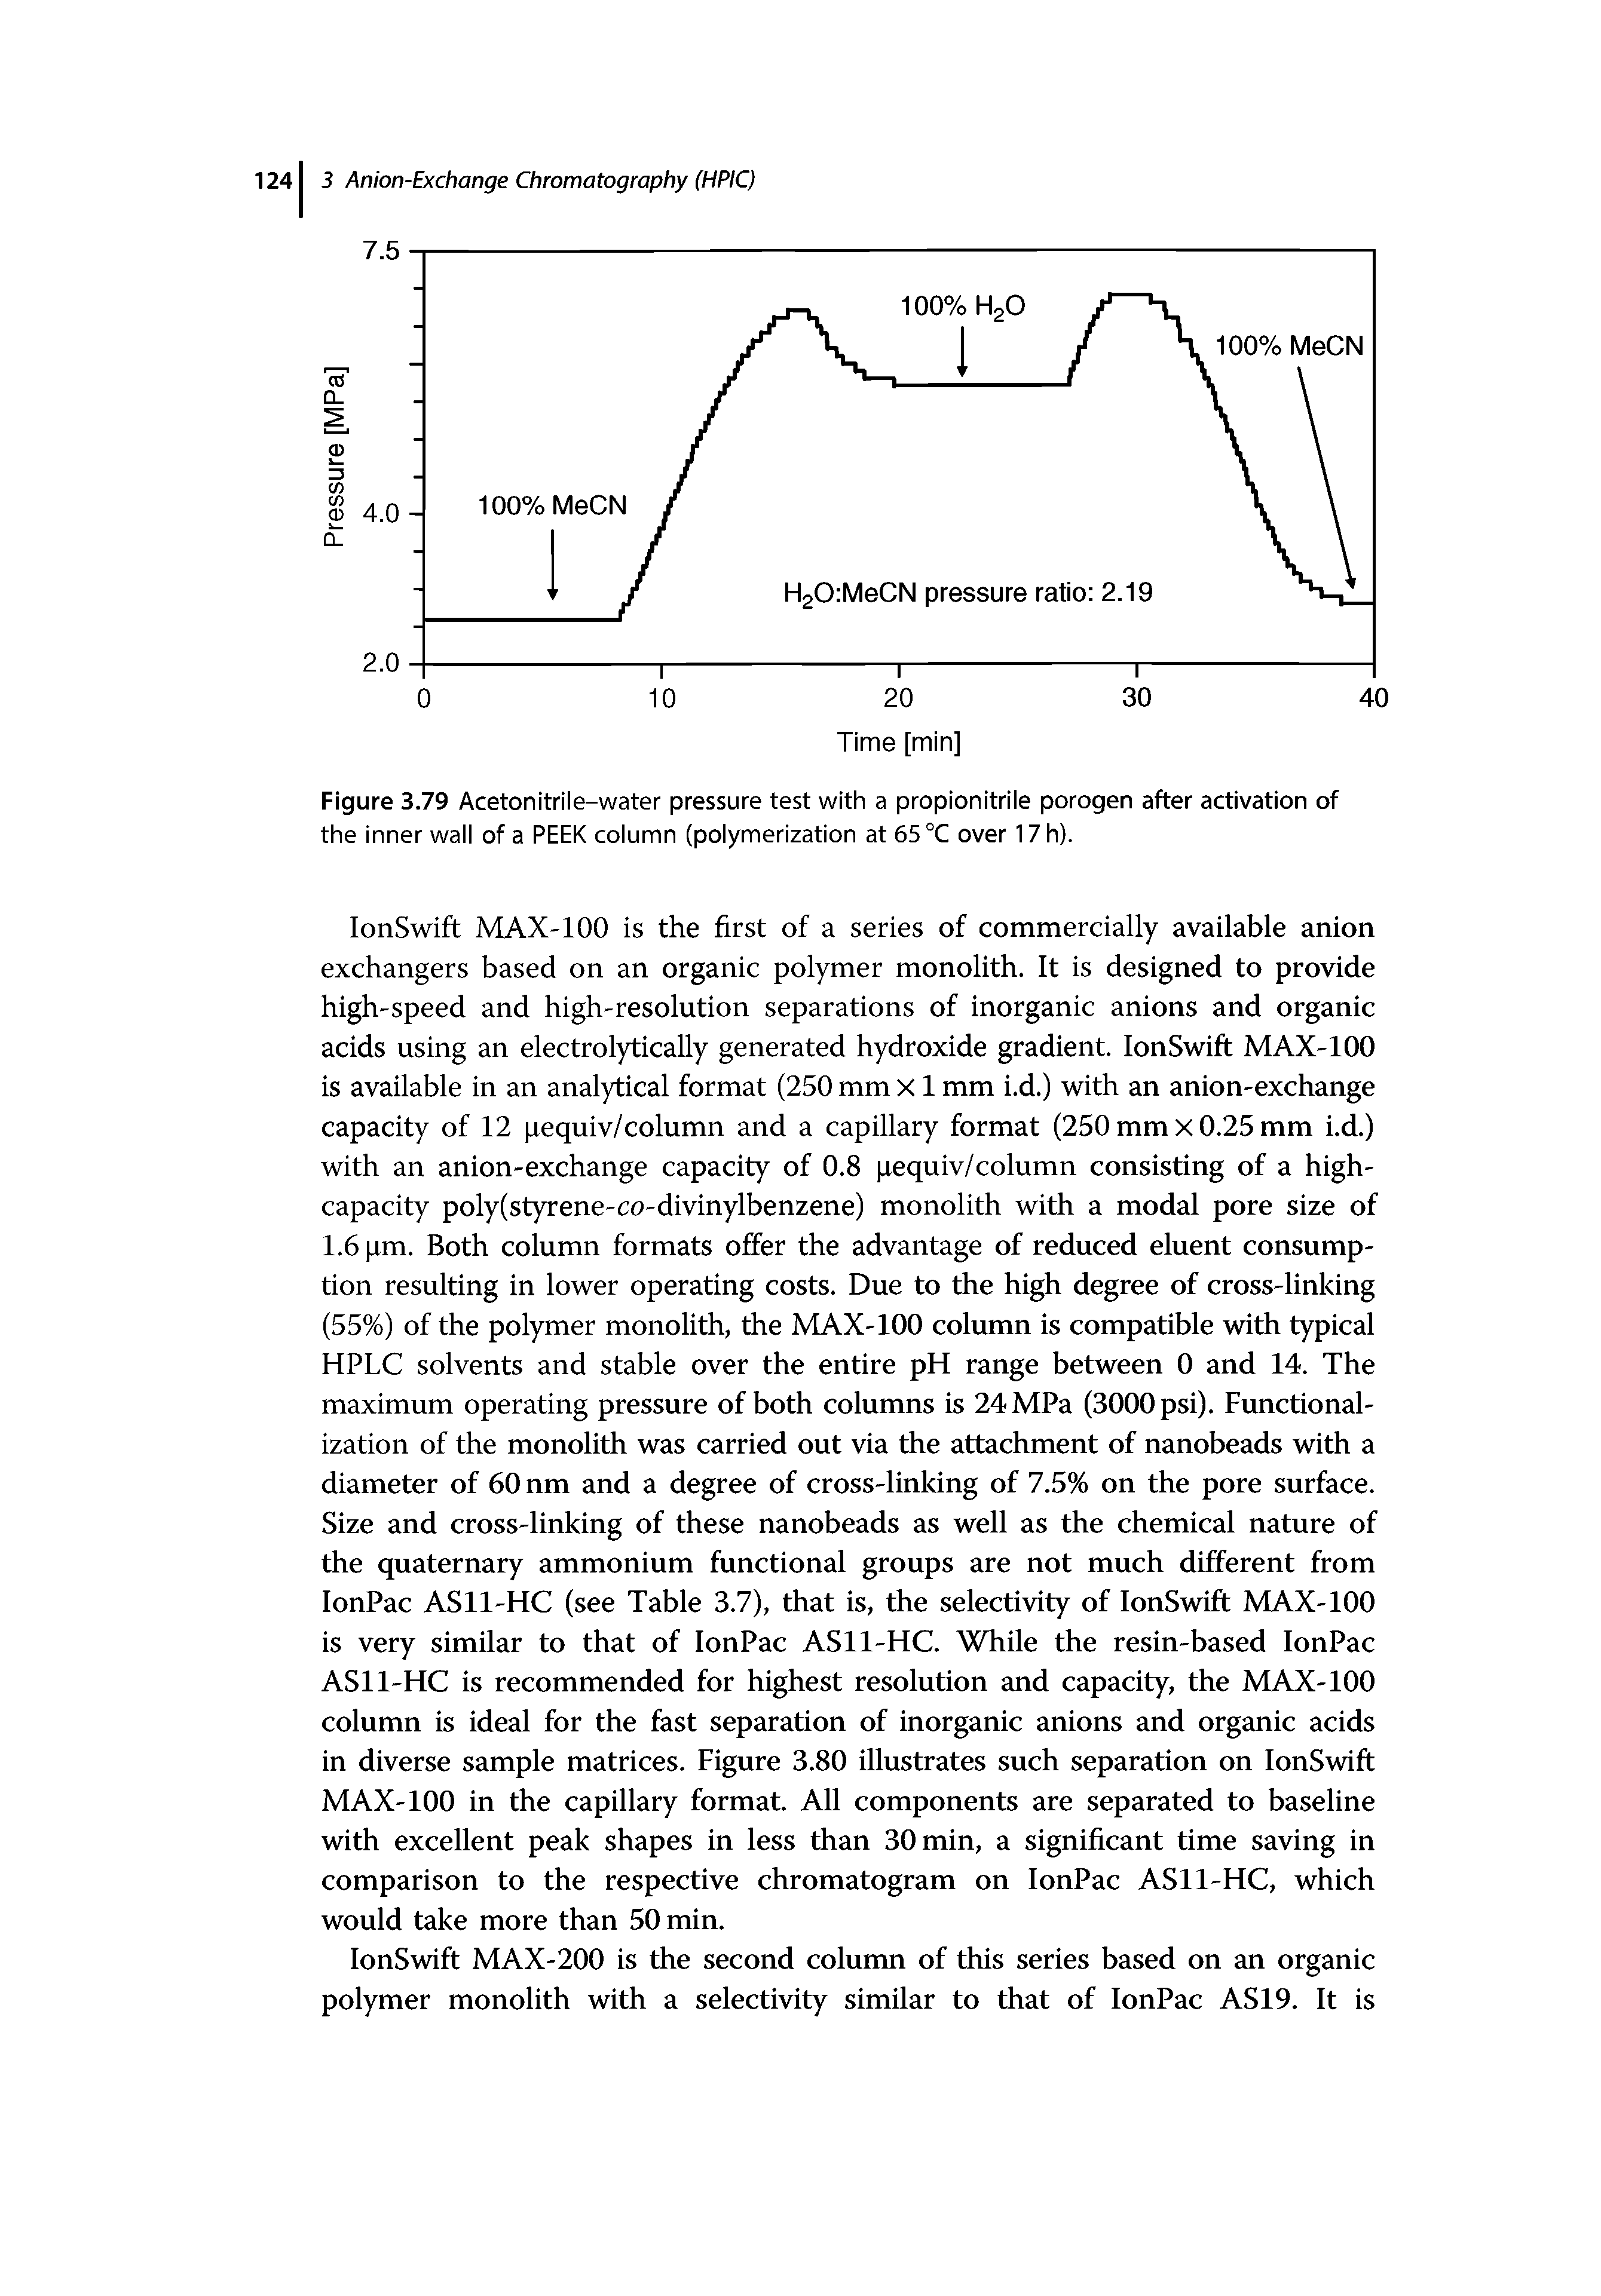 Figure 3.79 Acetonitrile-water pressure test with a propionitrile porogen after activation of the inner wall of a PEEK column (polymerization at 65 °C over 17 h).